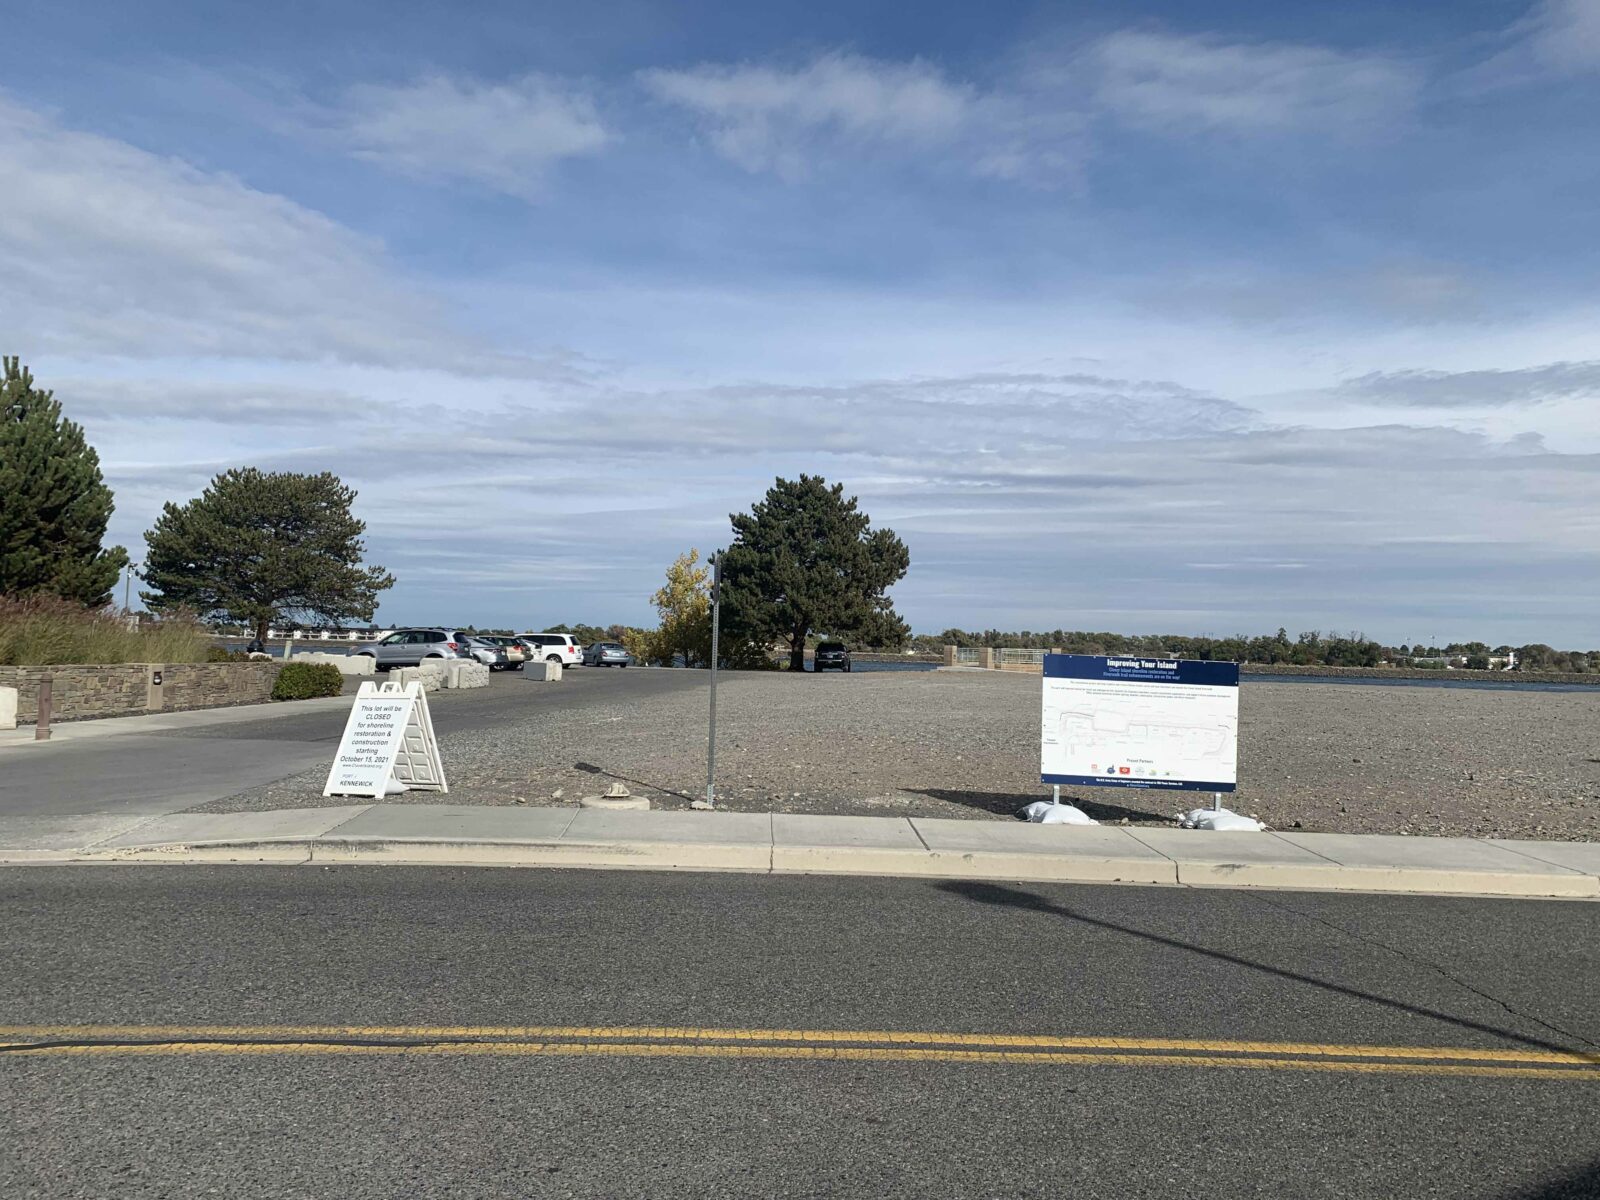 Signage at Clover Island marks a closed parking lot and describes the planned shoreline restoration projects.